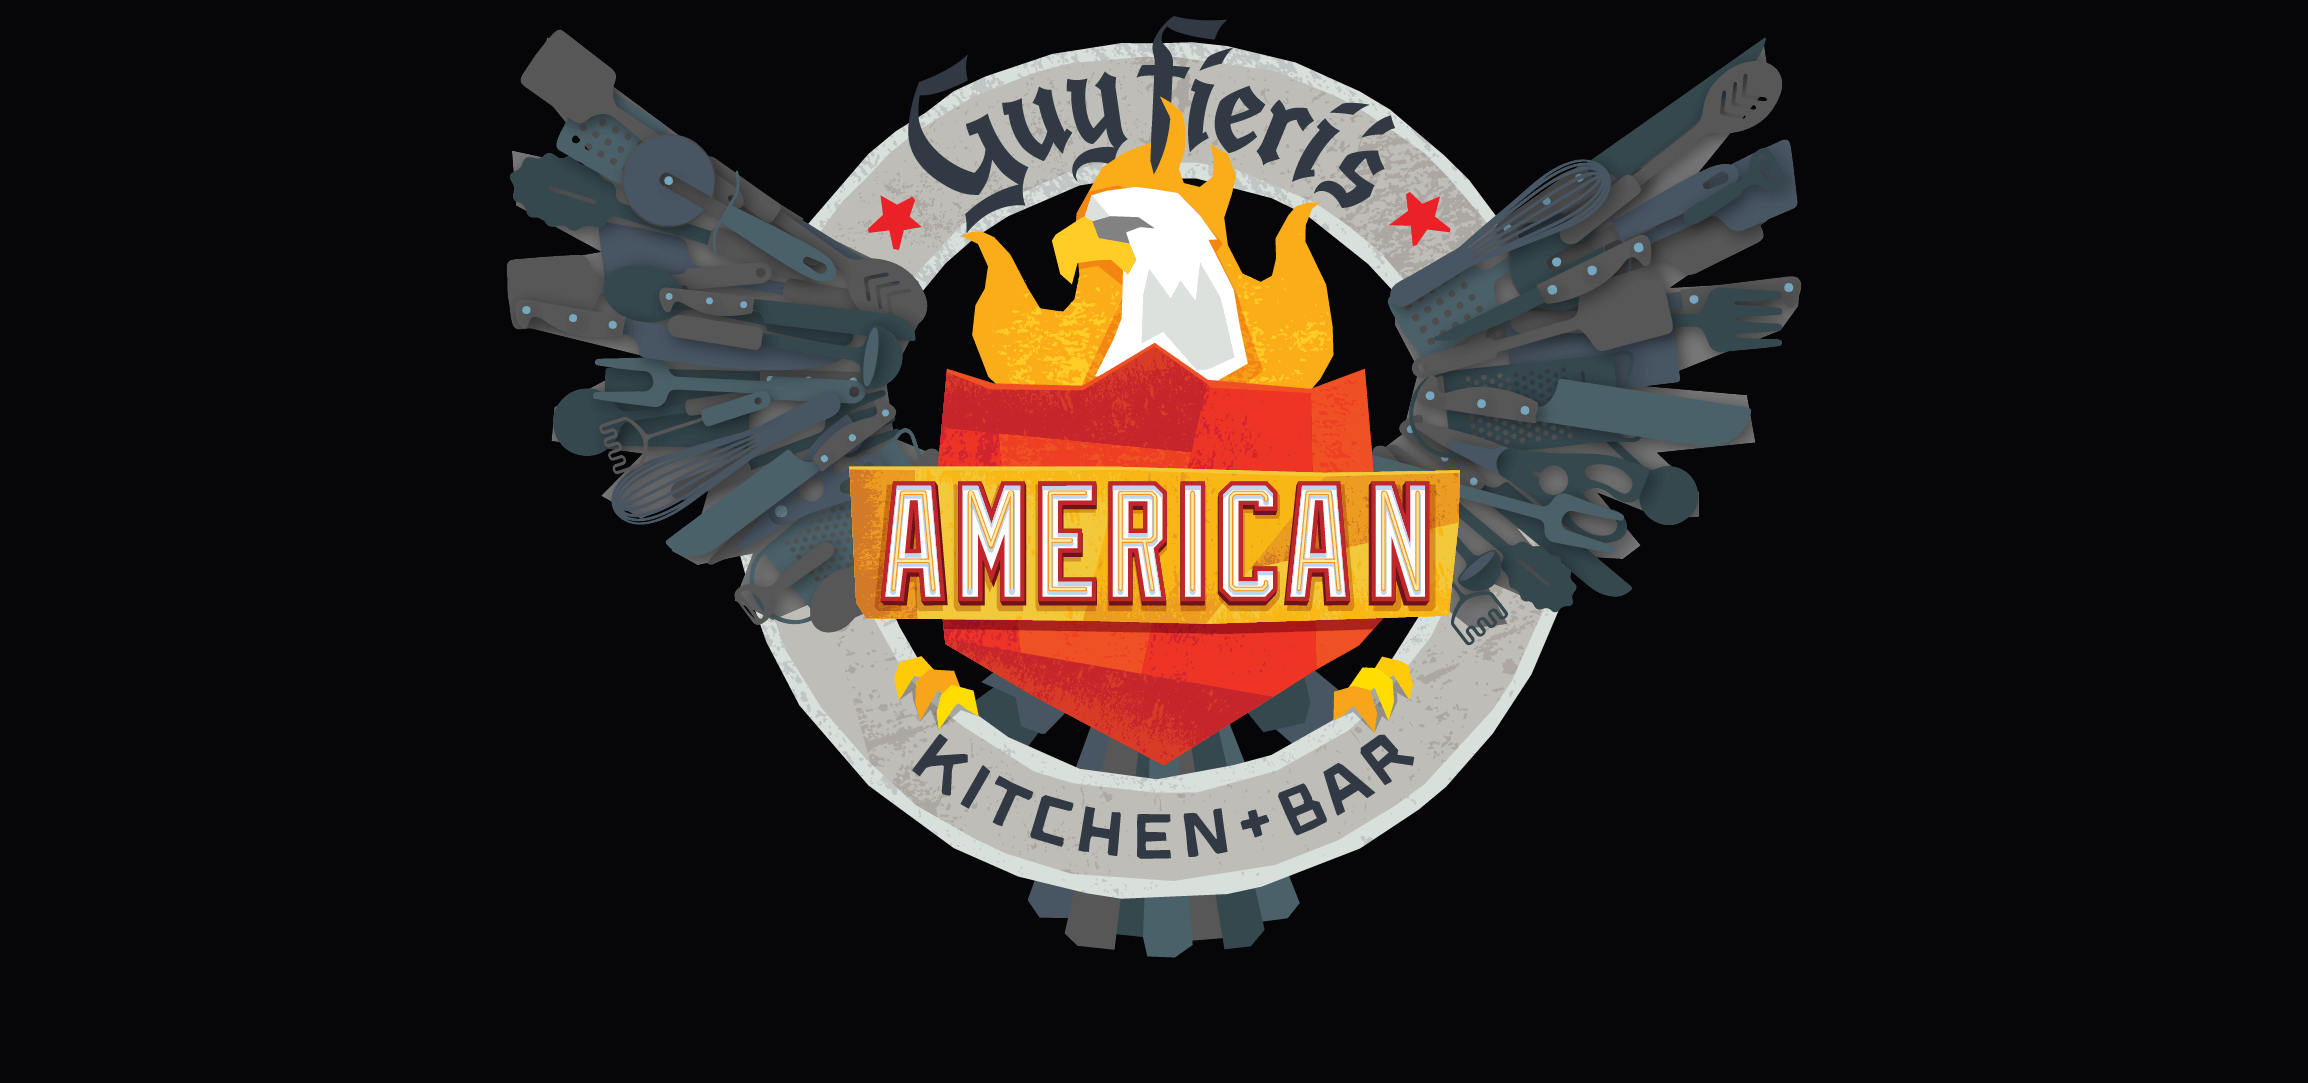 guy fieri's american kitchen and bar durant